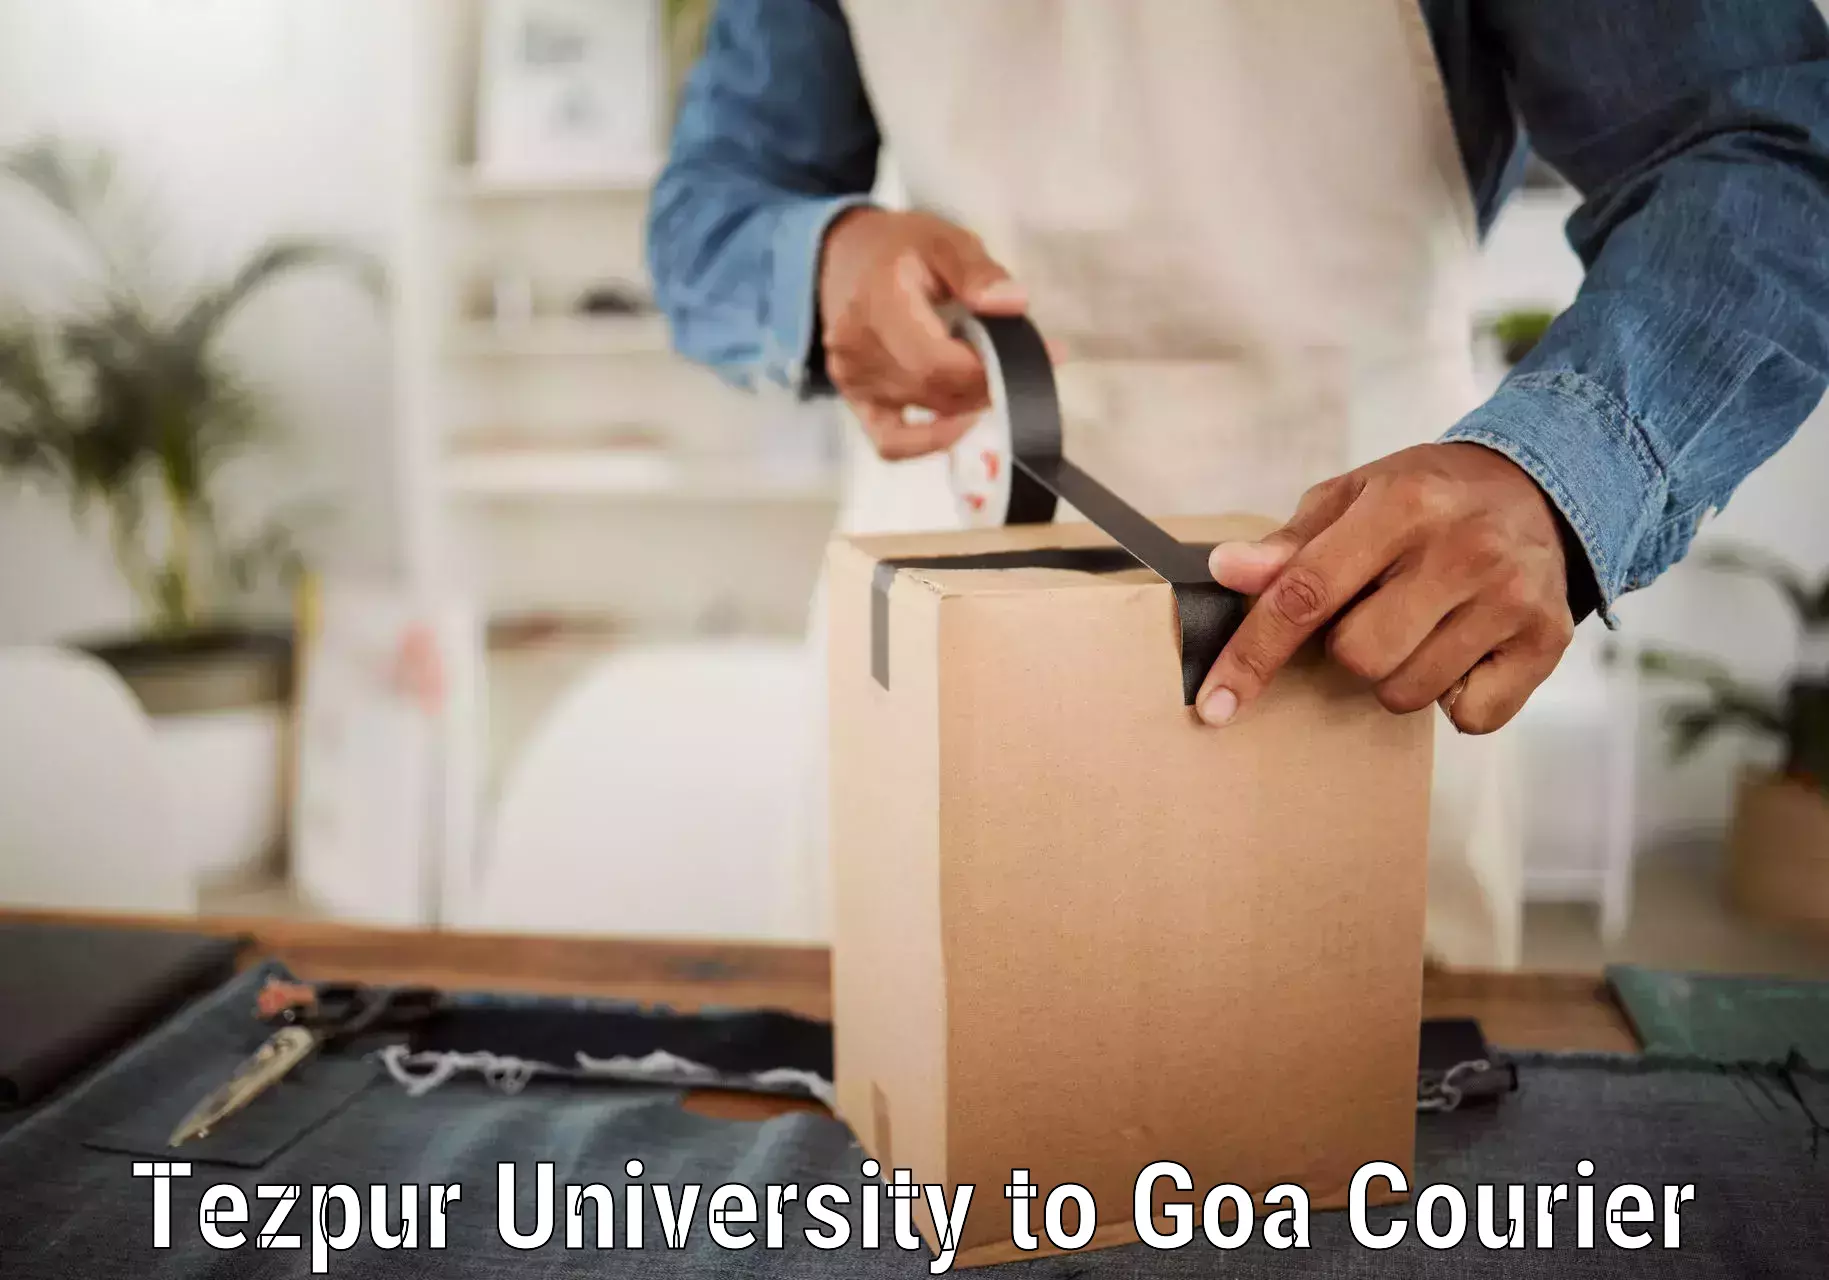 Nationwide delivery network Tezpur University to Goa University